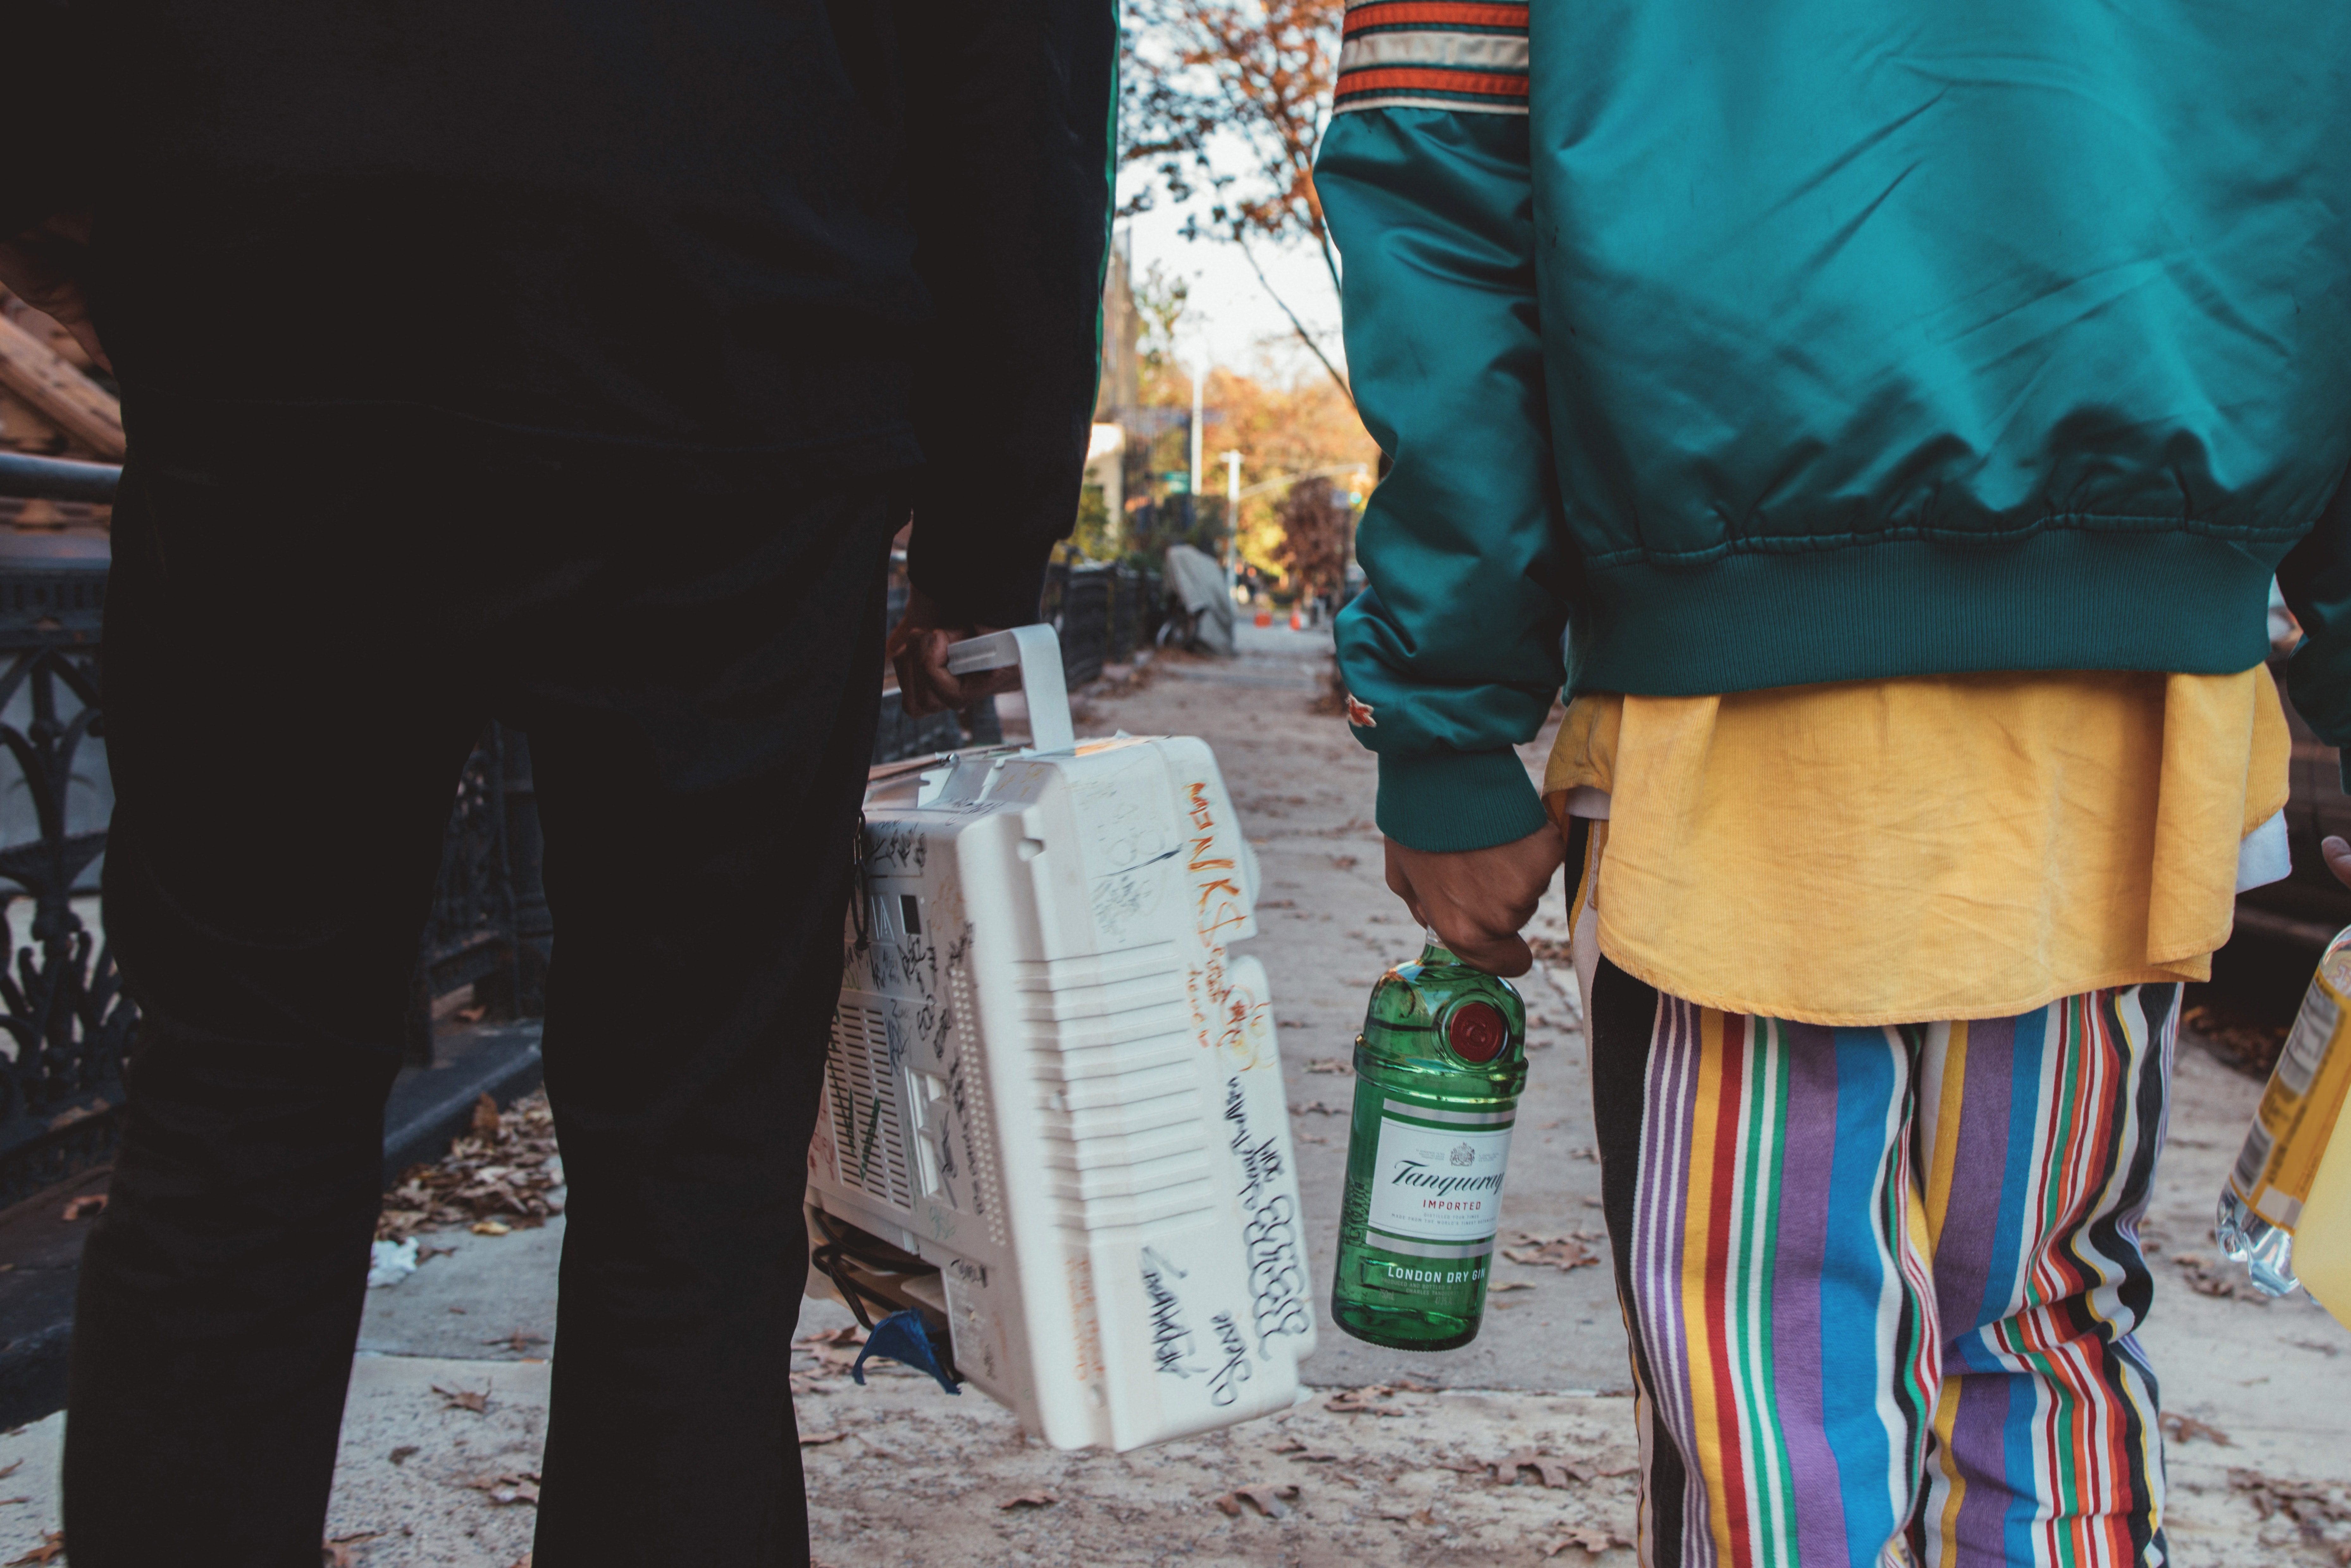 theophilus-london-tanqueray-hip-hop-tom-collins-playlist